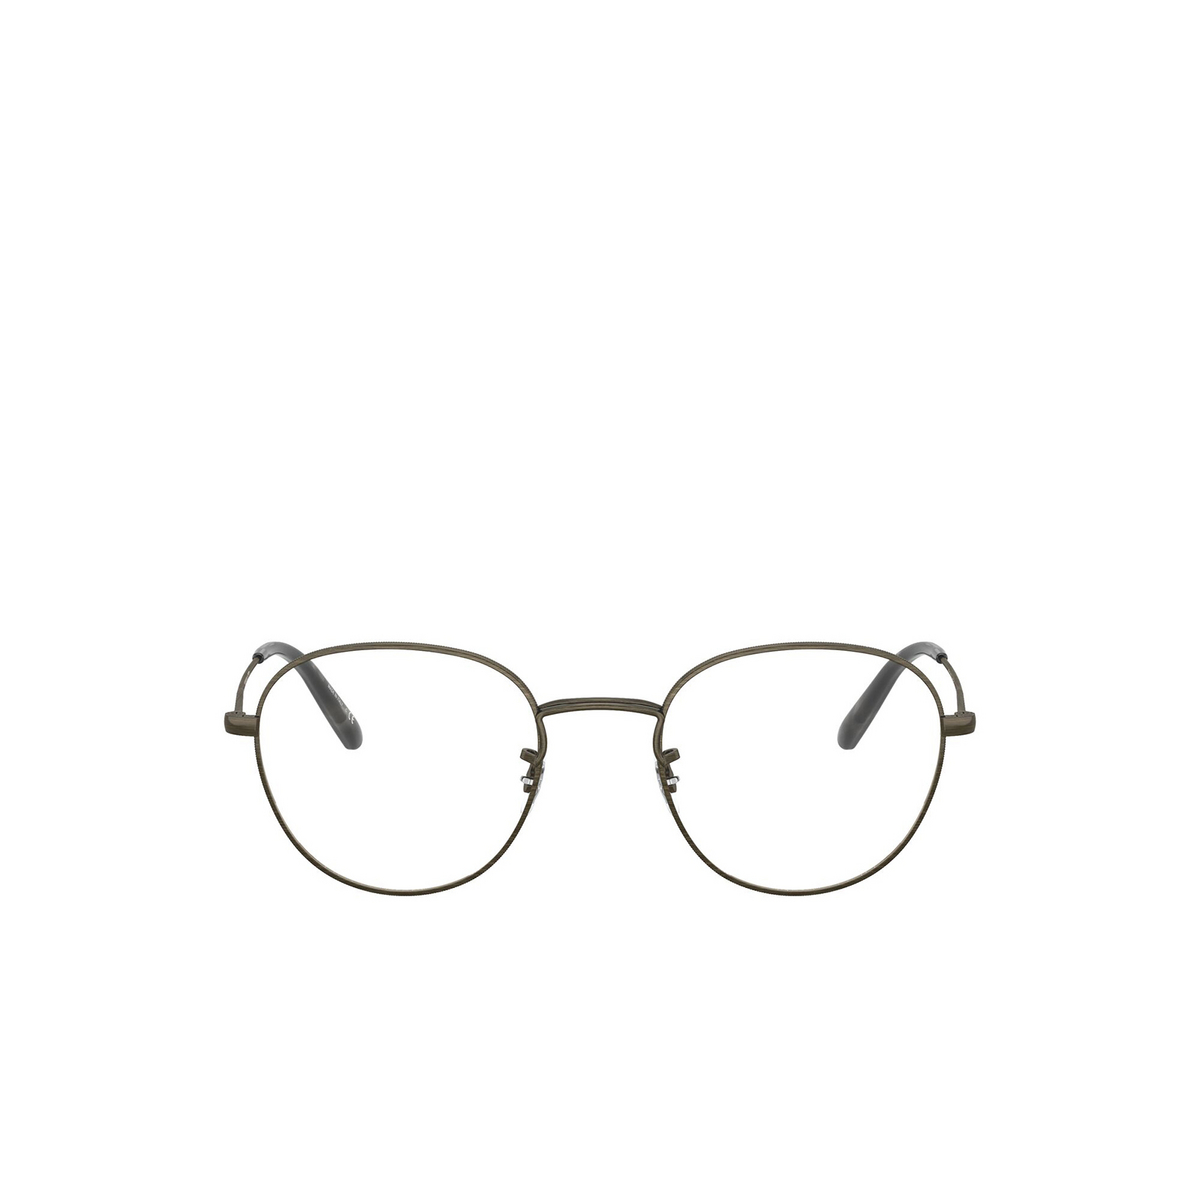 Oliver Peoples® Round Eyeglasses: Piercy OV1281 color Antique Pewter 5289 - front view.